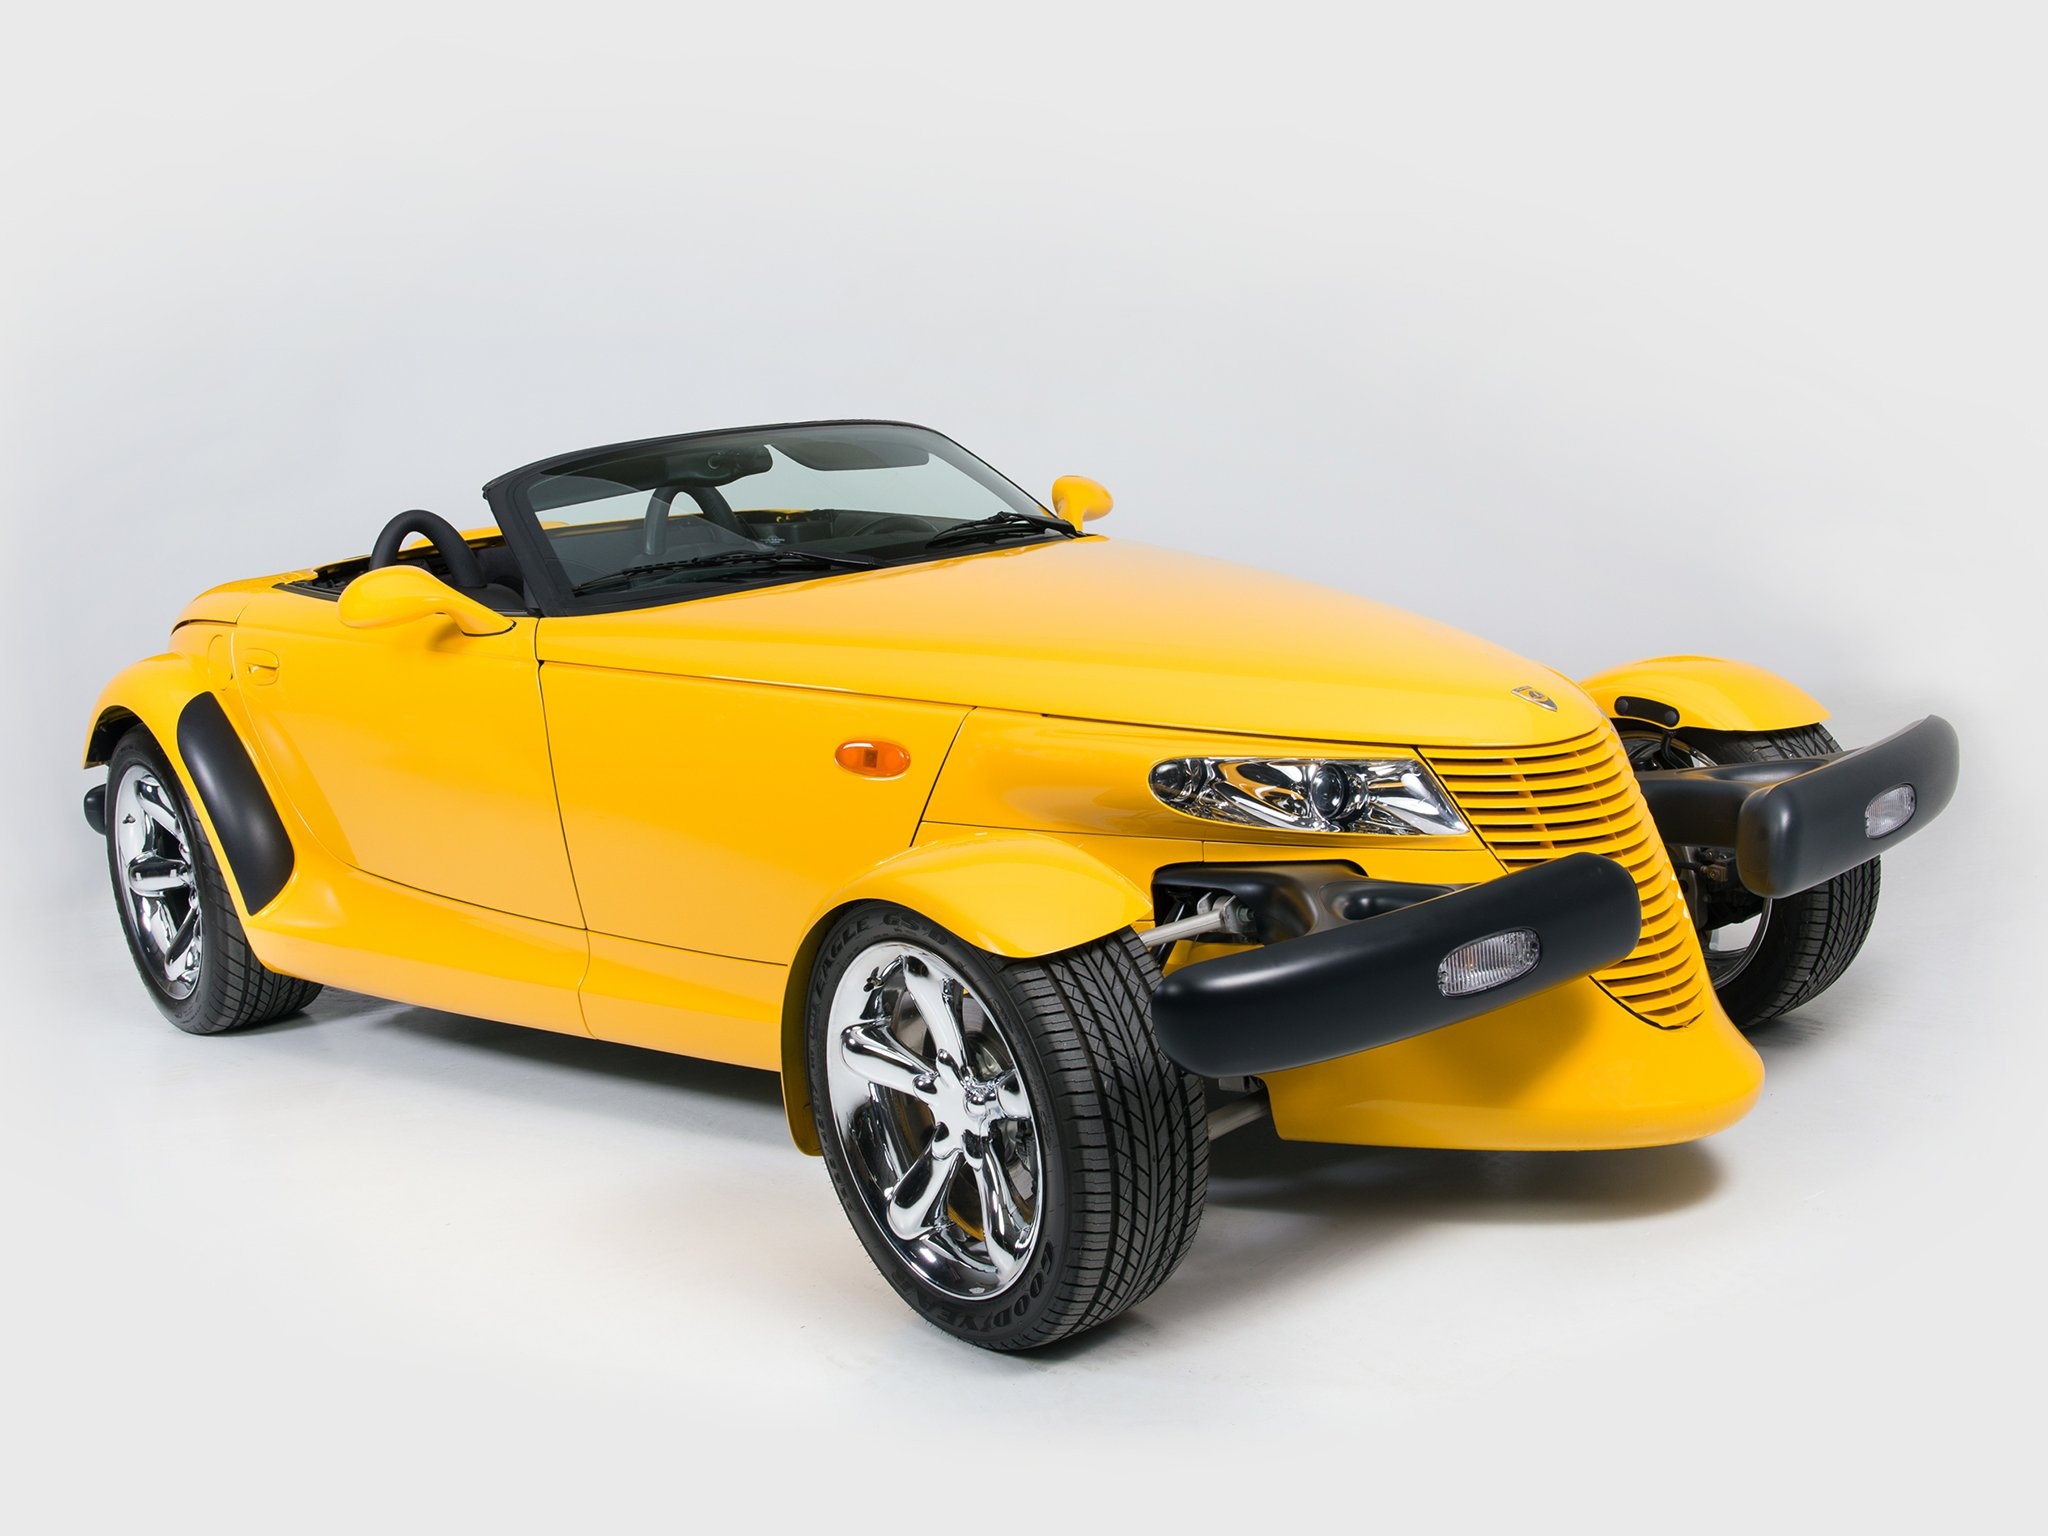 Plymouth Prowler, Supercar icon, Prowler's legacy, Jaw-dropping image, 2050x1540 HD Desktop